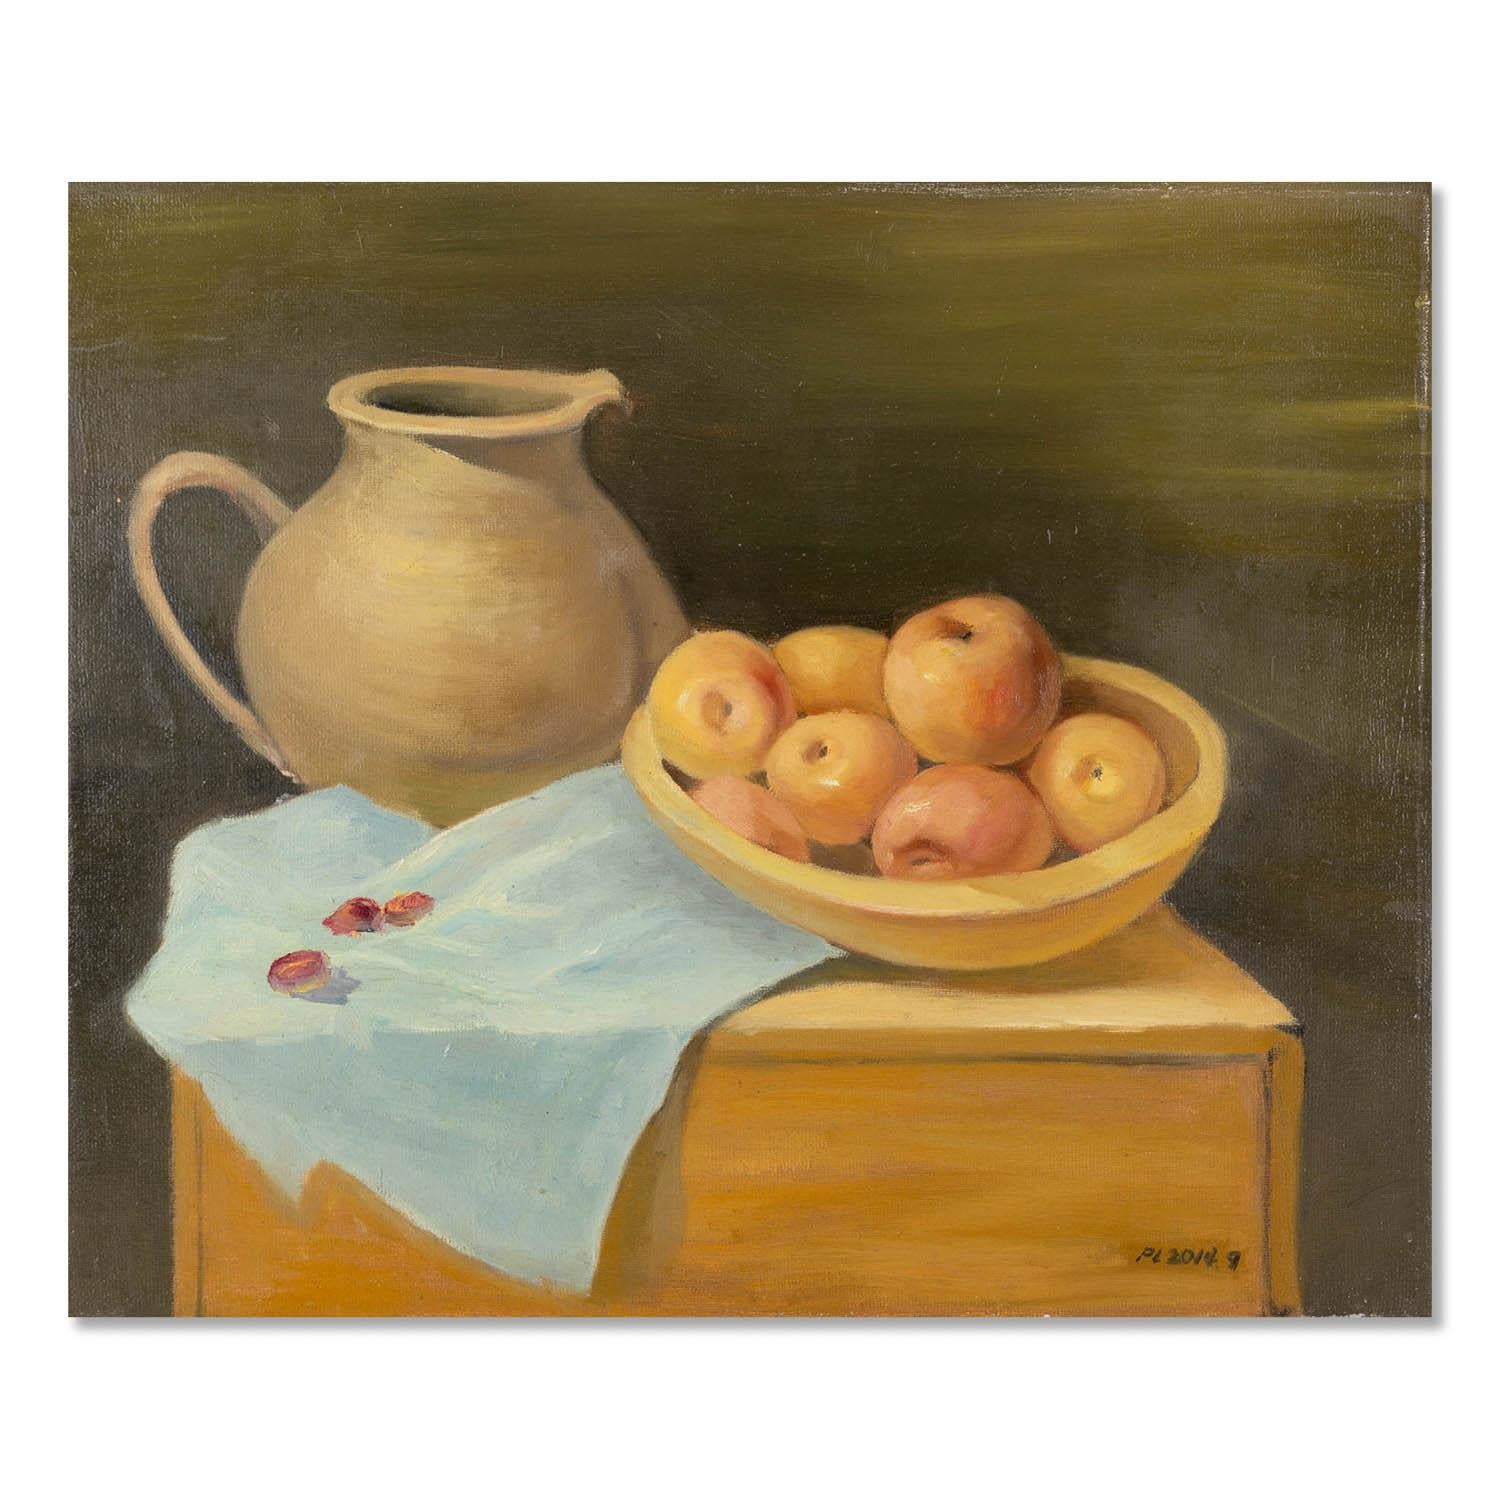  Title: Still Life
 Medium: Oil on canvas
 Size: 19 x 23 inches
 Frame: Framing options available!
 Condition: The painting appears to be in excellent condition.
 
 Year: 2014
 Artist: Yaxiao JIang
 Signature: Signed
 Signature Location: Lower